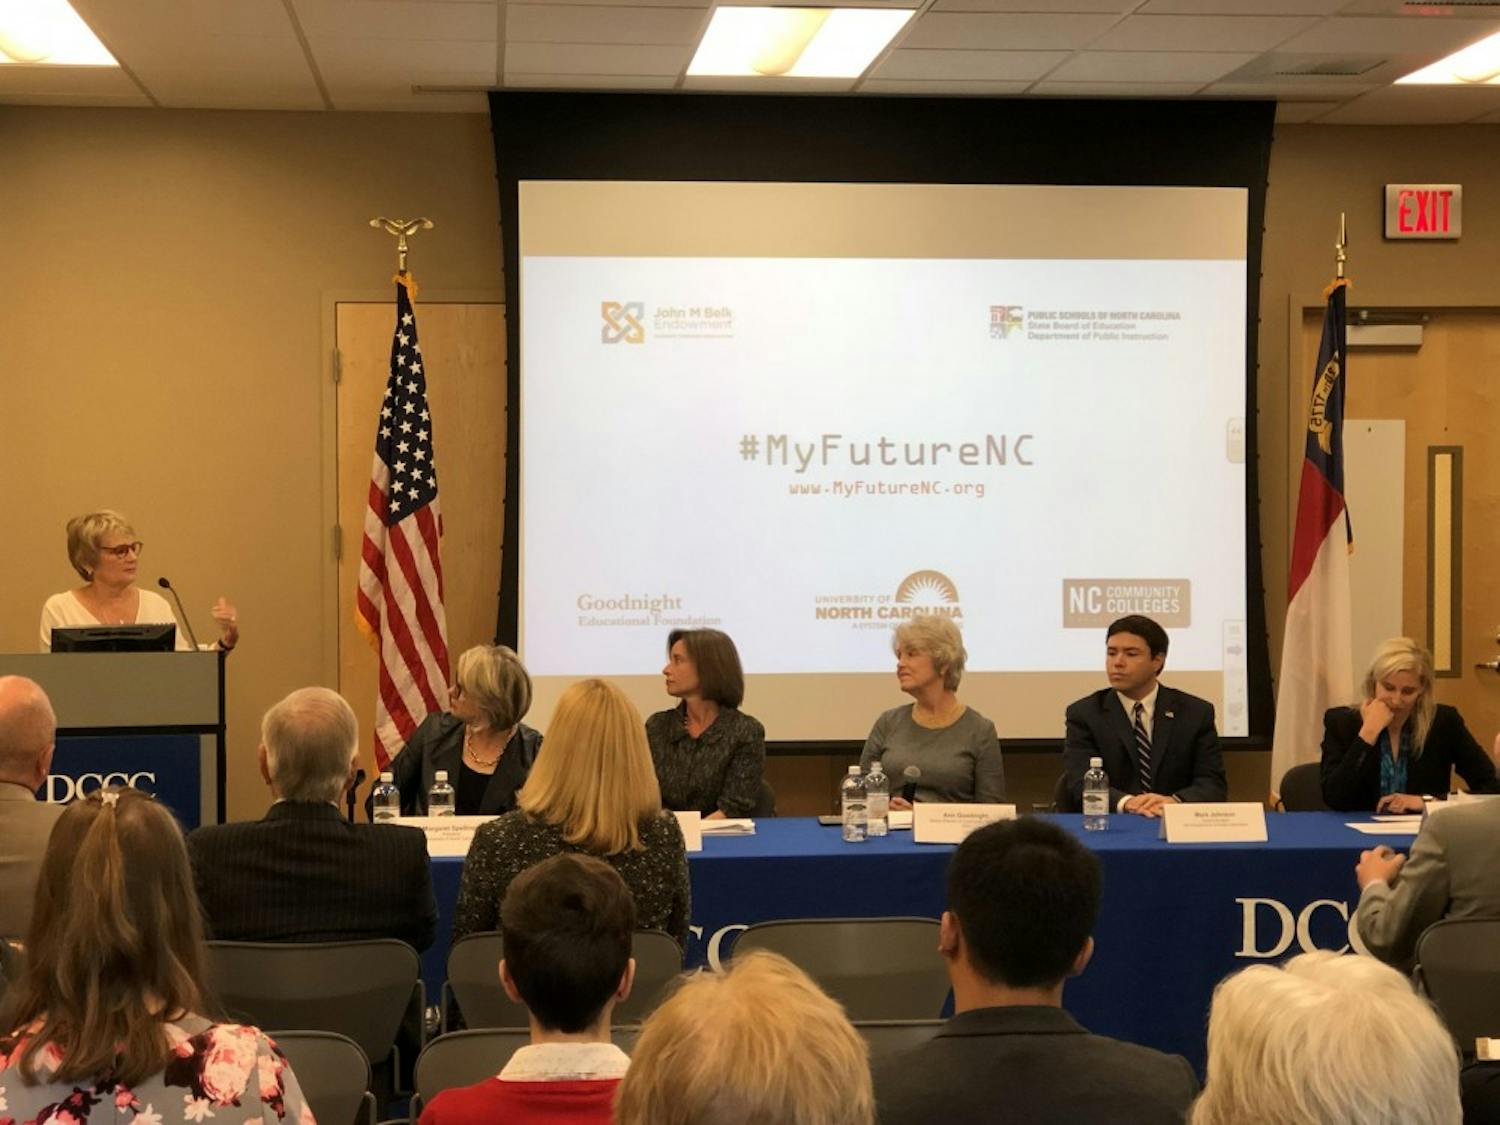 From left to right: Mary Rittling, president of the Davidson County Community College; UNC-system President Margaret Spellings; Jennifer Haygood, acting president of the N.C. Community College System; Ann Goodnight of the Goodnight Education Foundation; N.C. Superintendent Mark Johnson; MC Belk Pilon, chairperson of the John M. Belk Endowment. Photo courtesy of Kristy Teskey, executive director of My Future NC.